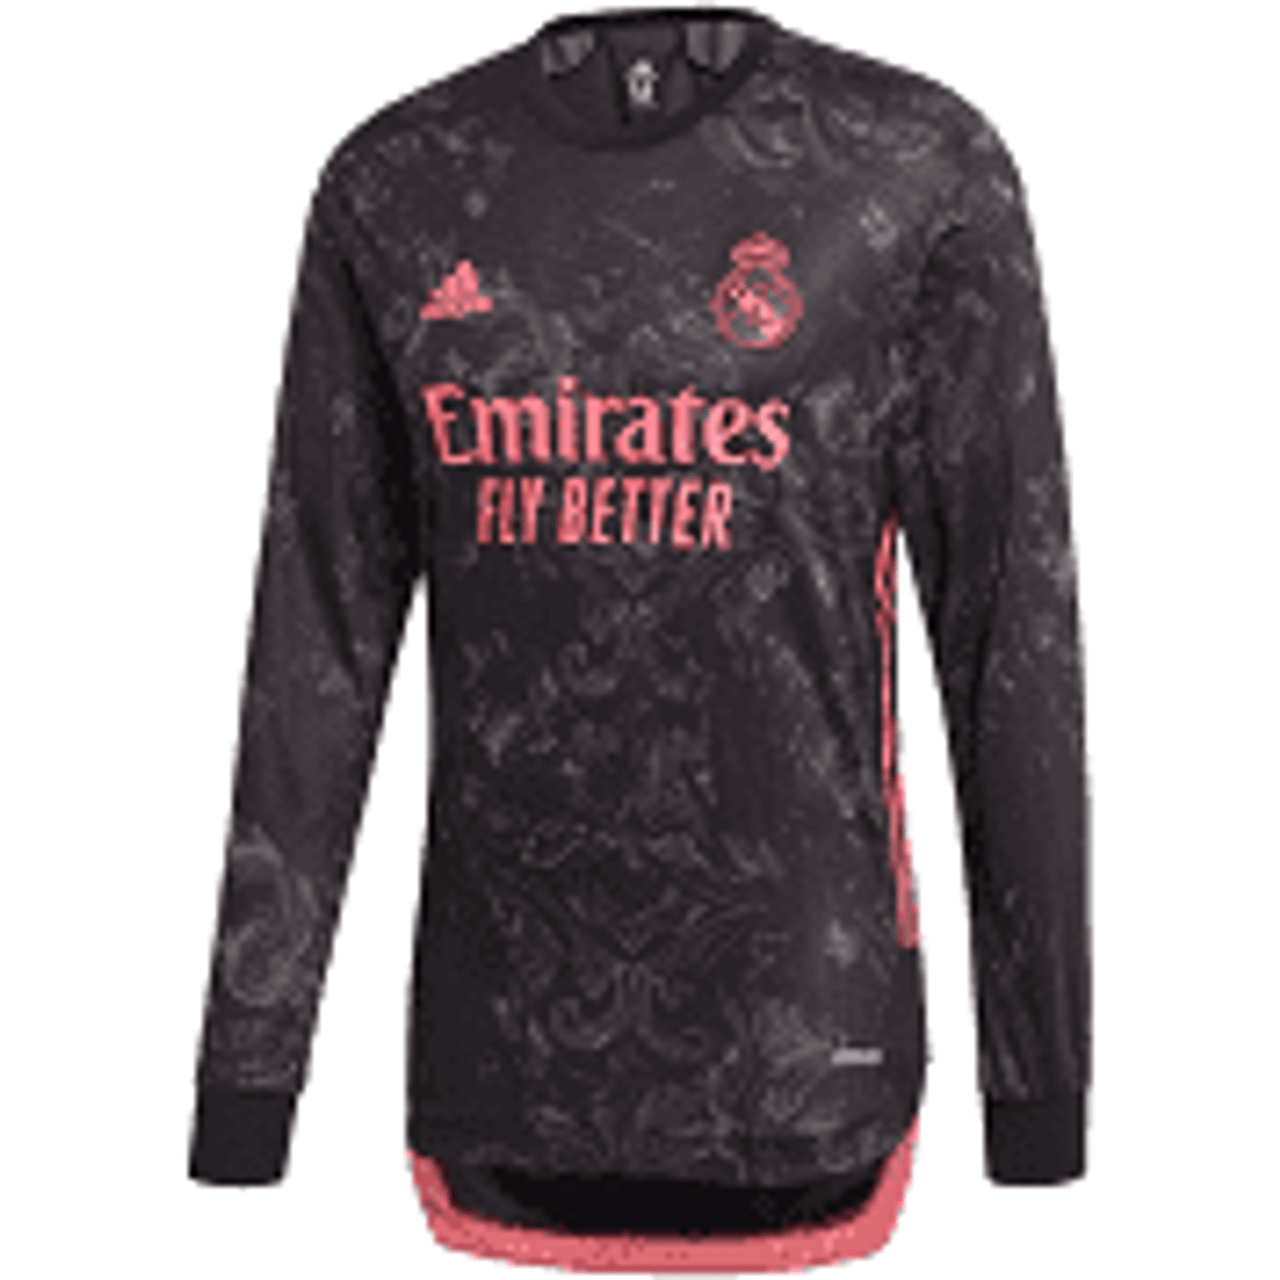 ADIDAS REAL MADRID MEN'S AUTHENTIC HOME LONG SLEEVE  JERSEY-2021-2022-WHITE-ORANGE